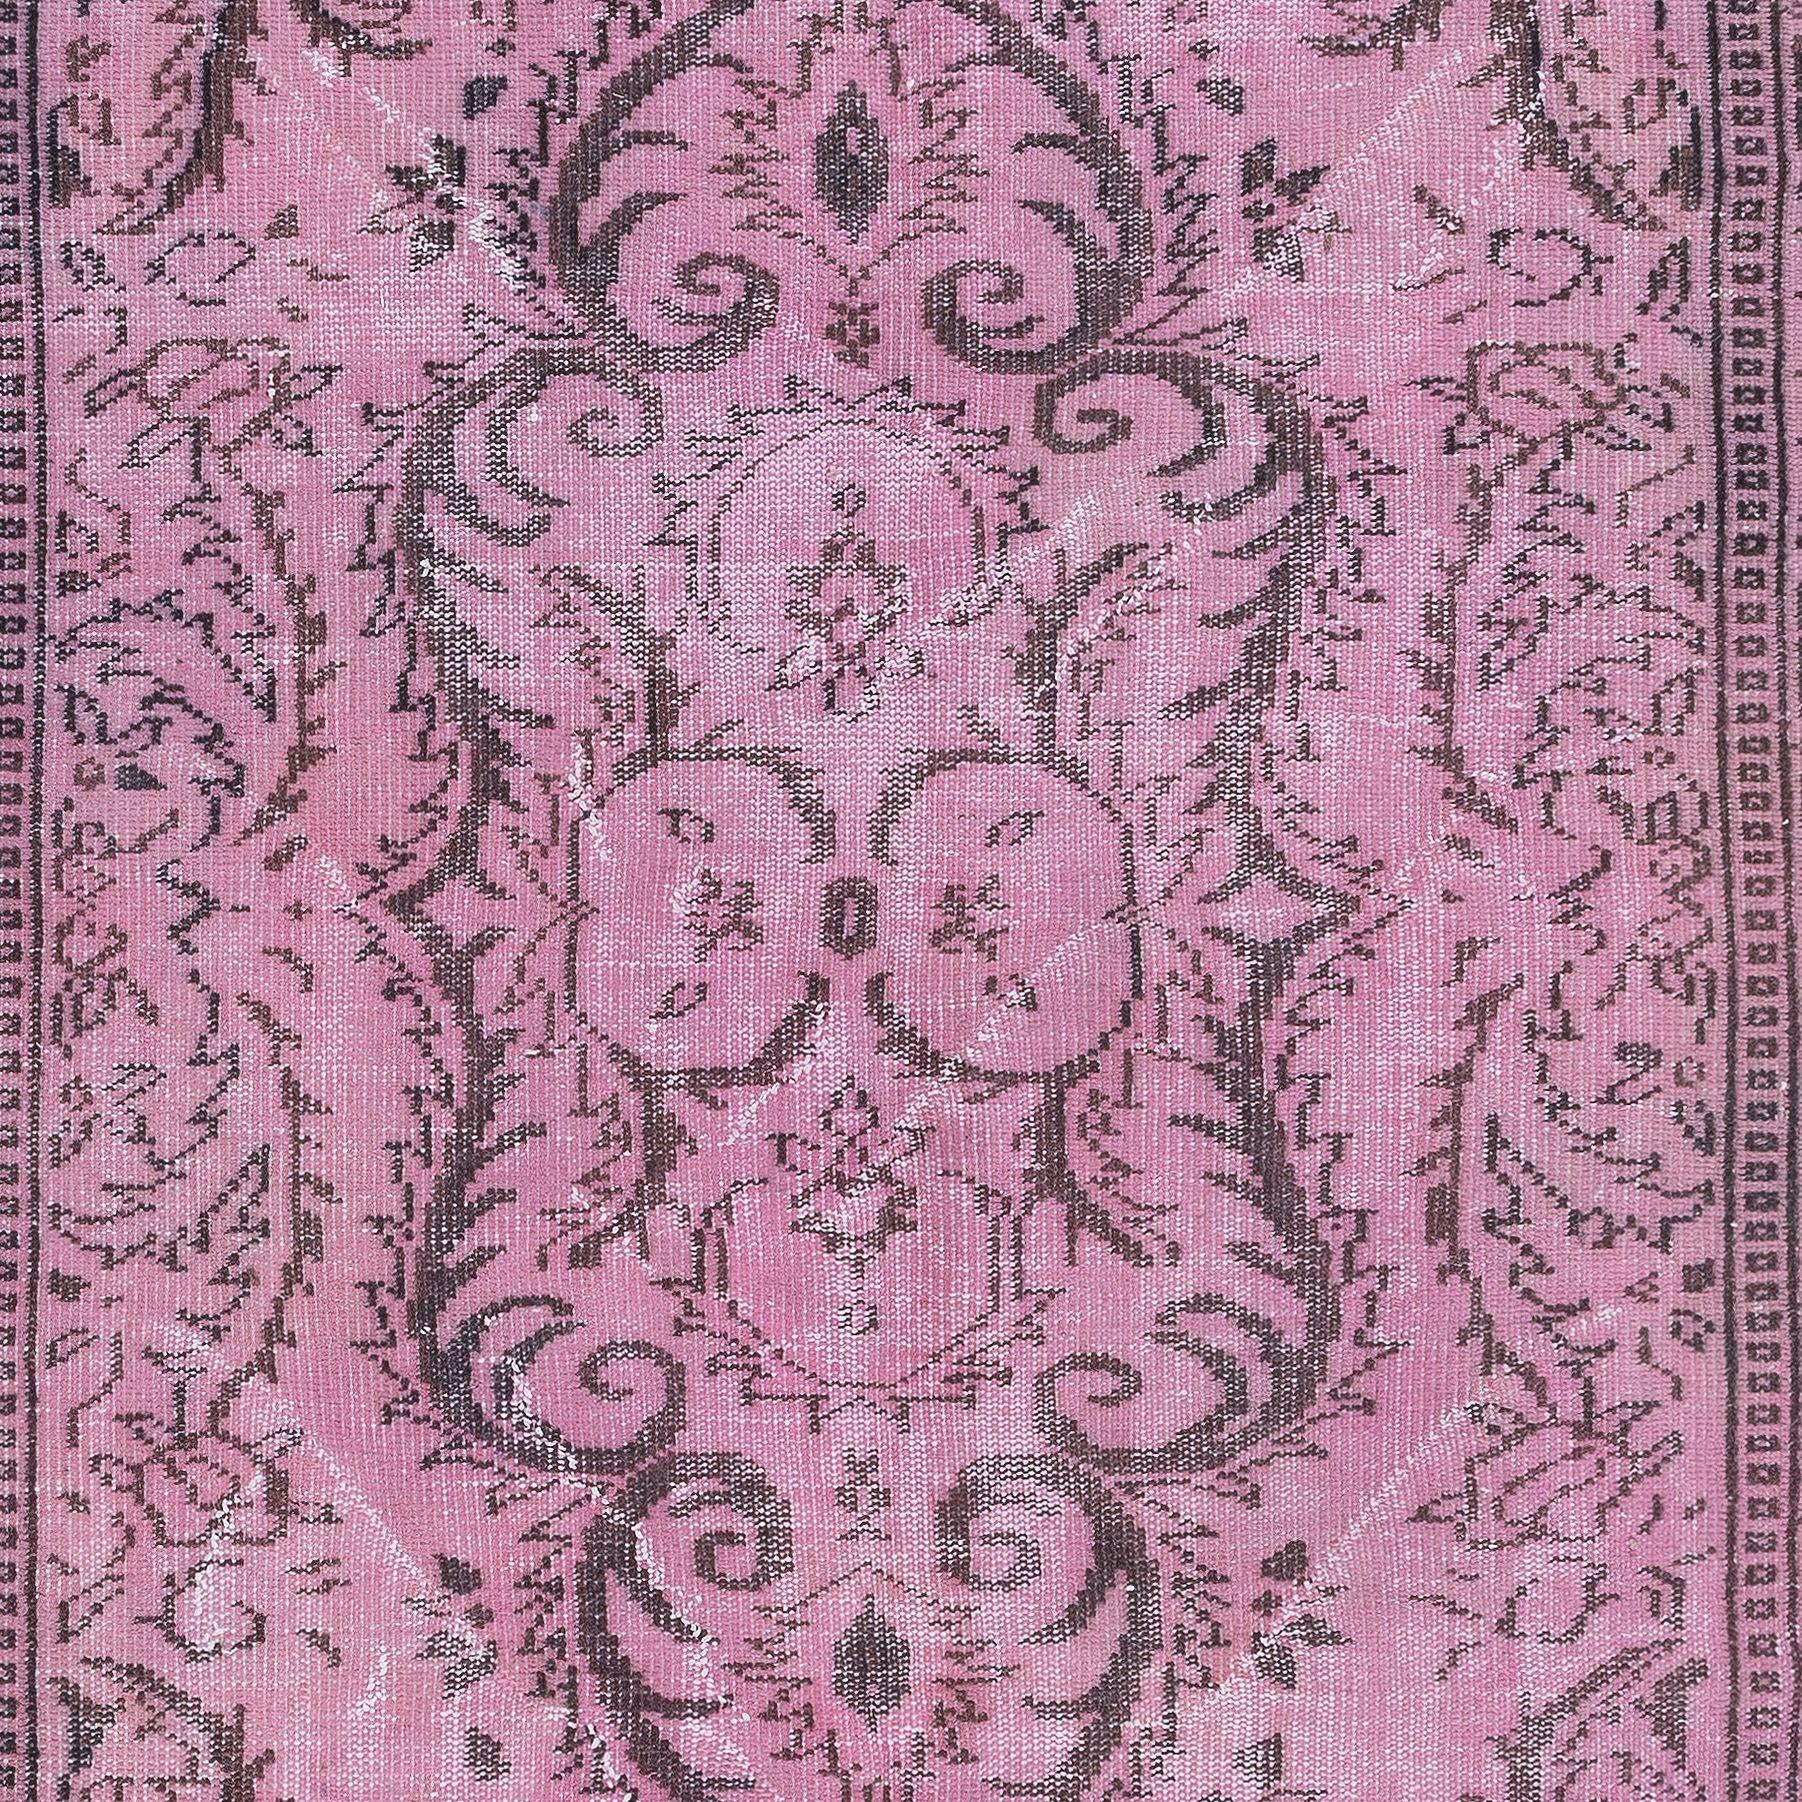 Hand-Woven 5x9 Ft Rustic Turkish Area Rug, Pink Handmade Modern Carpet, Floor Covering For Sale